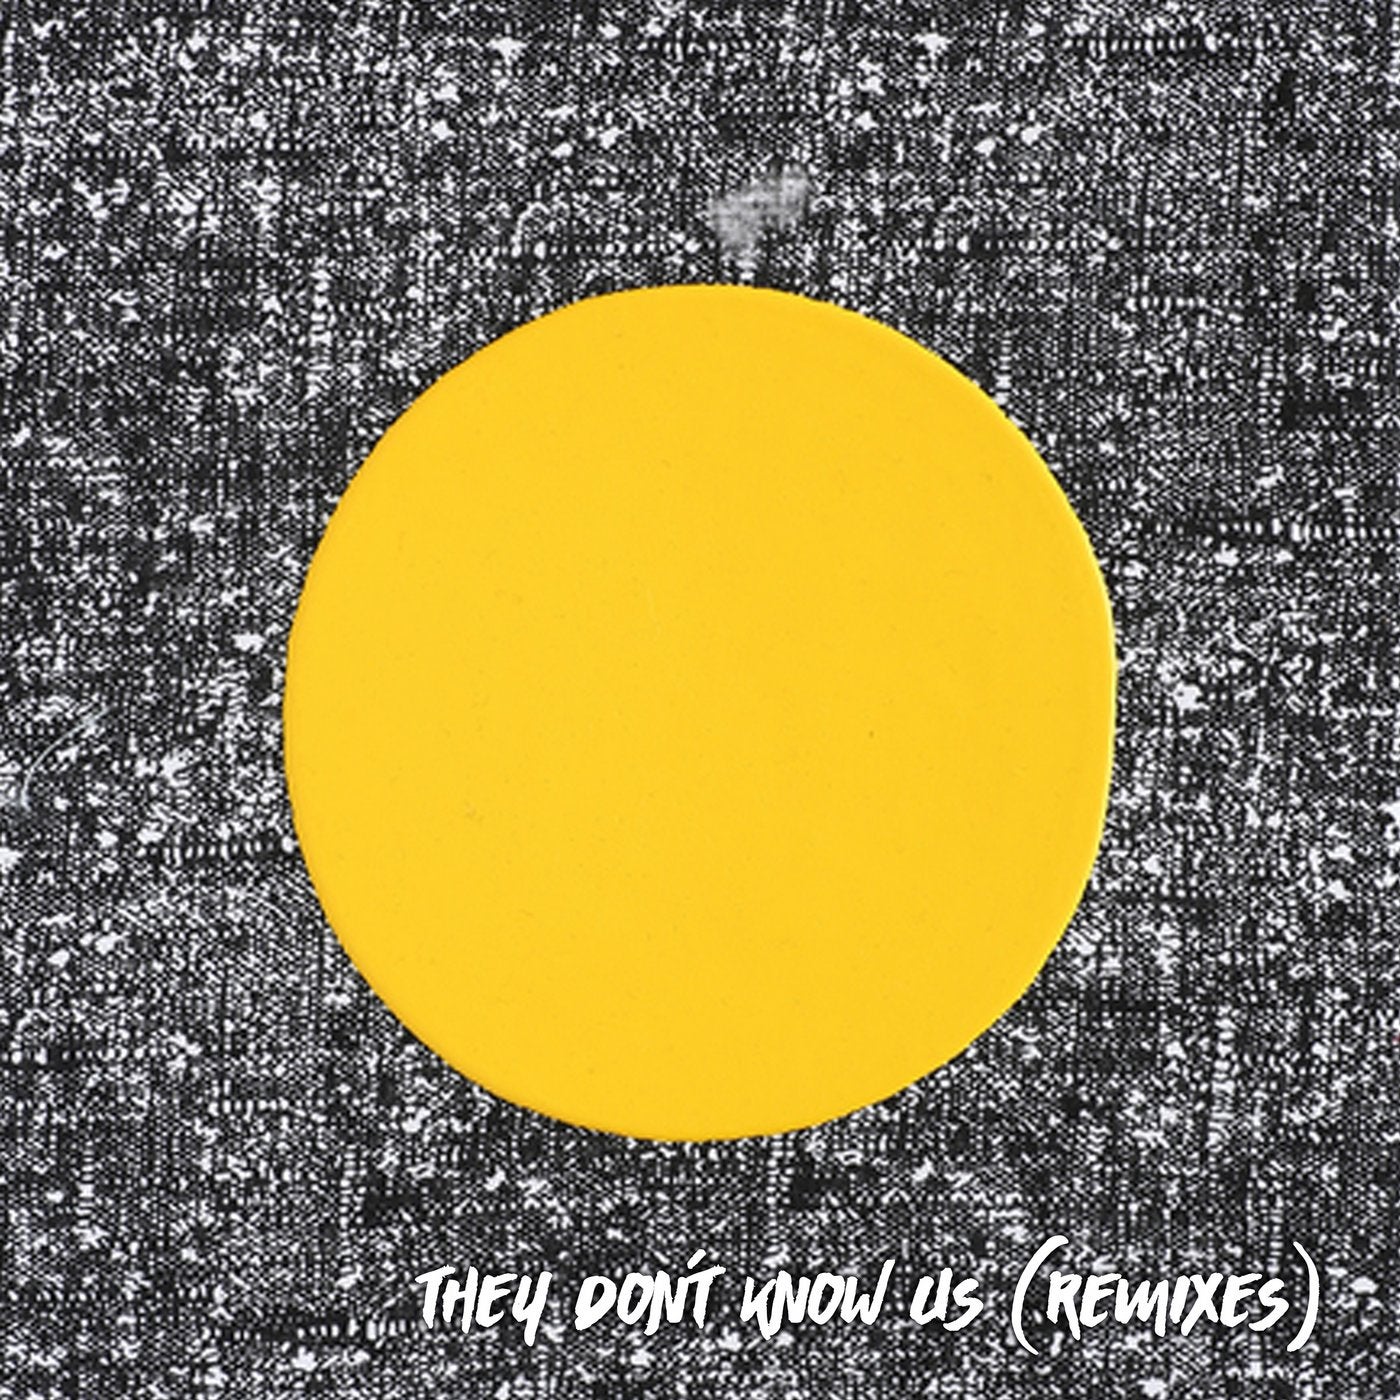 They Don't Know Us (Remixes)